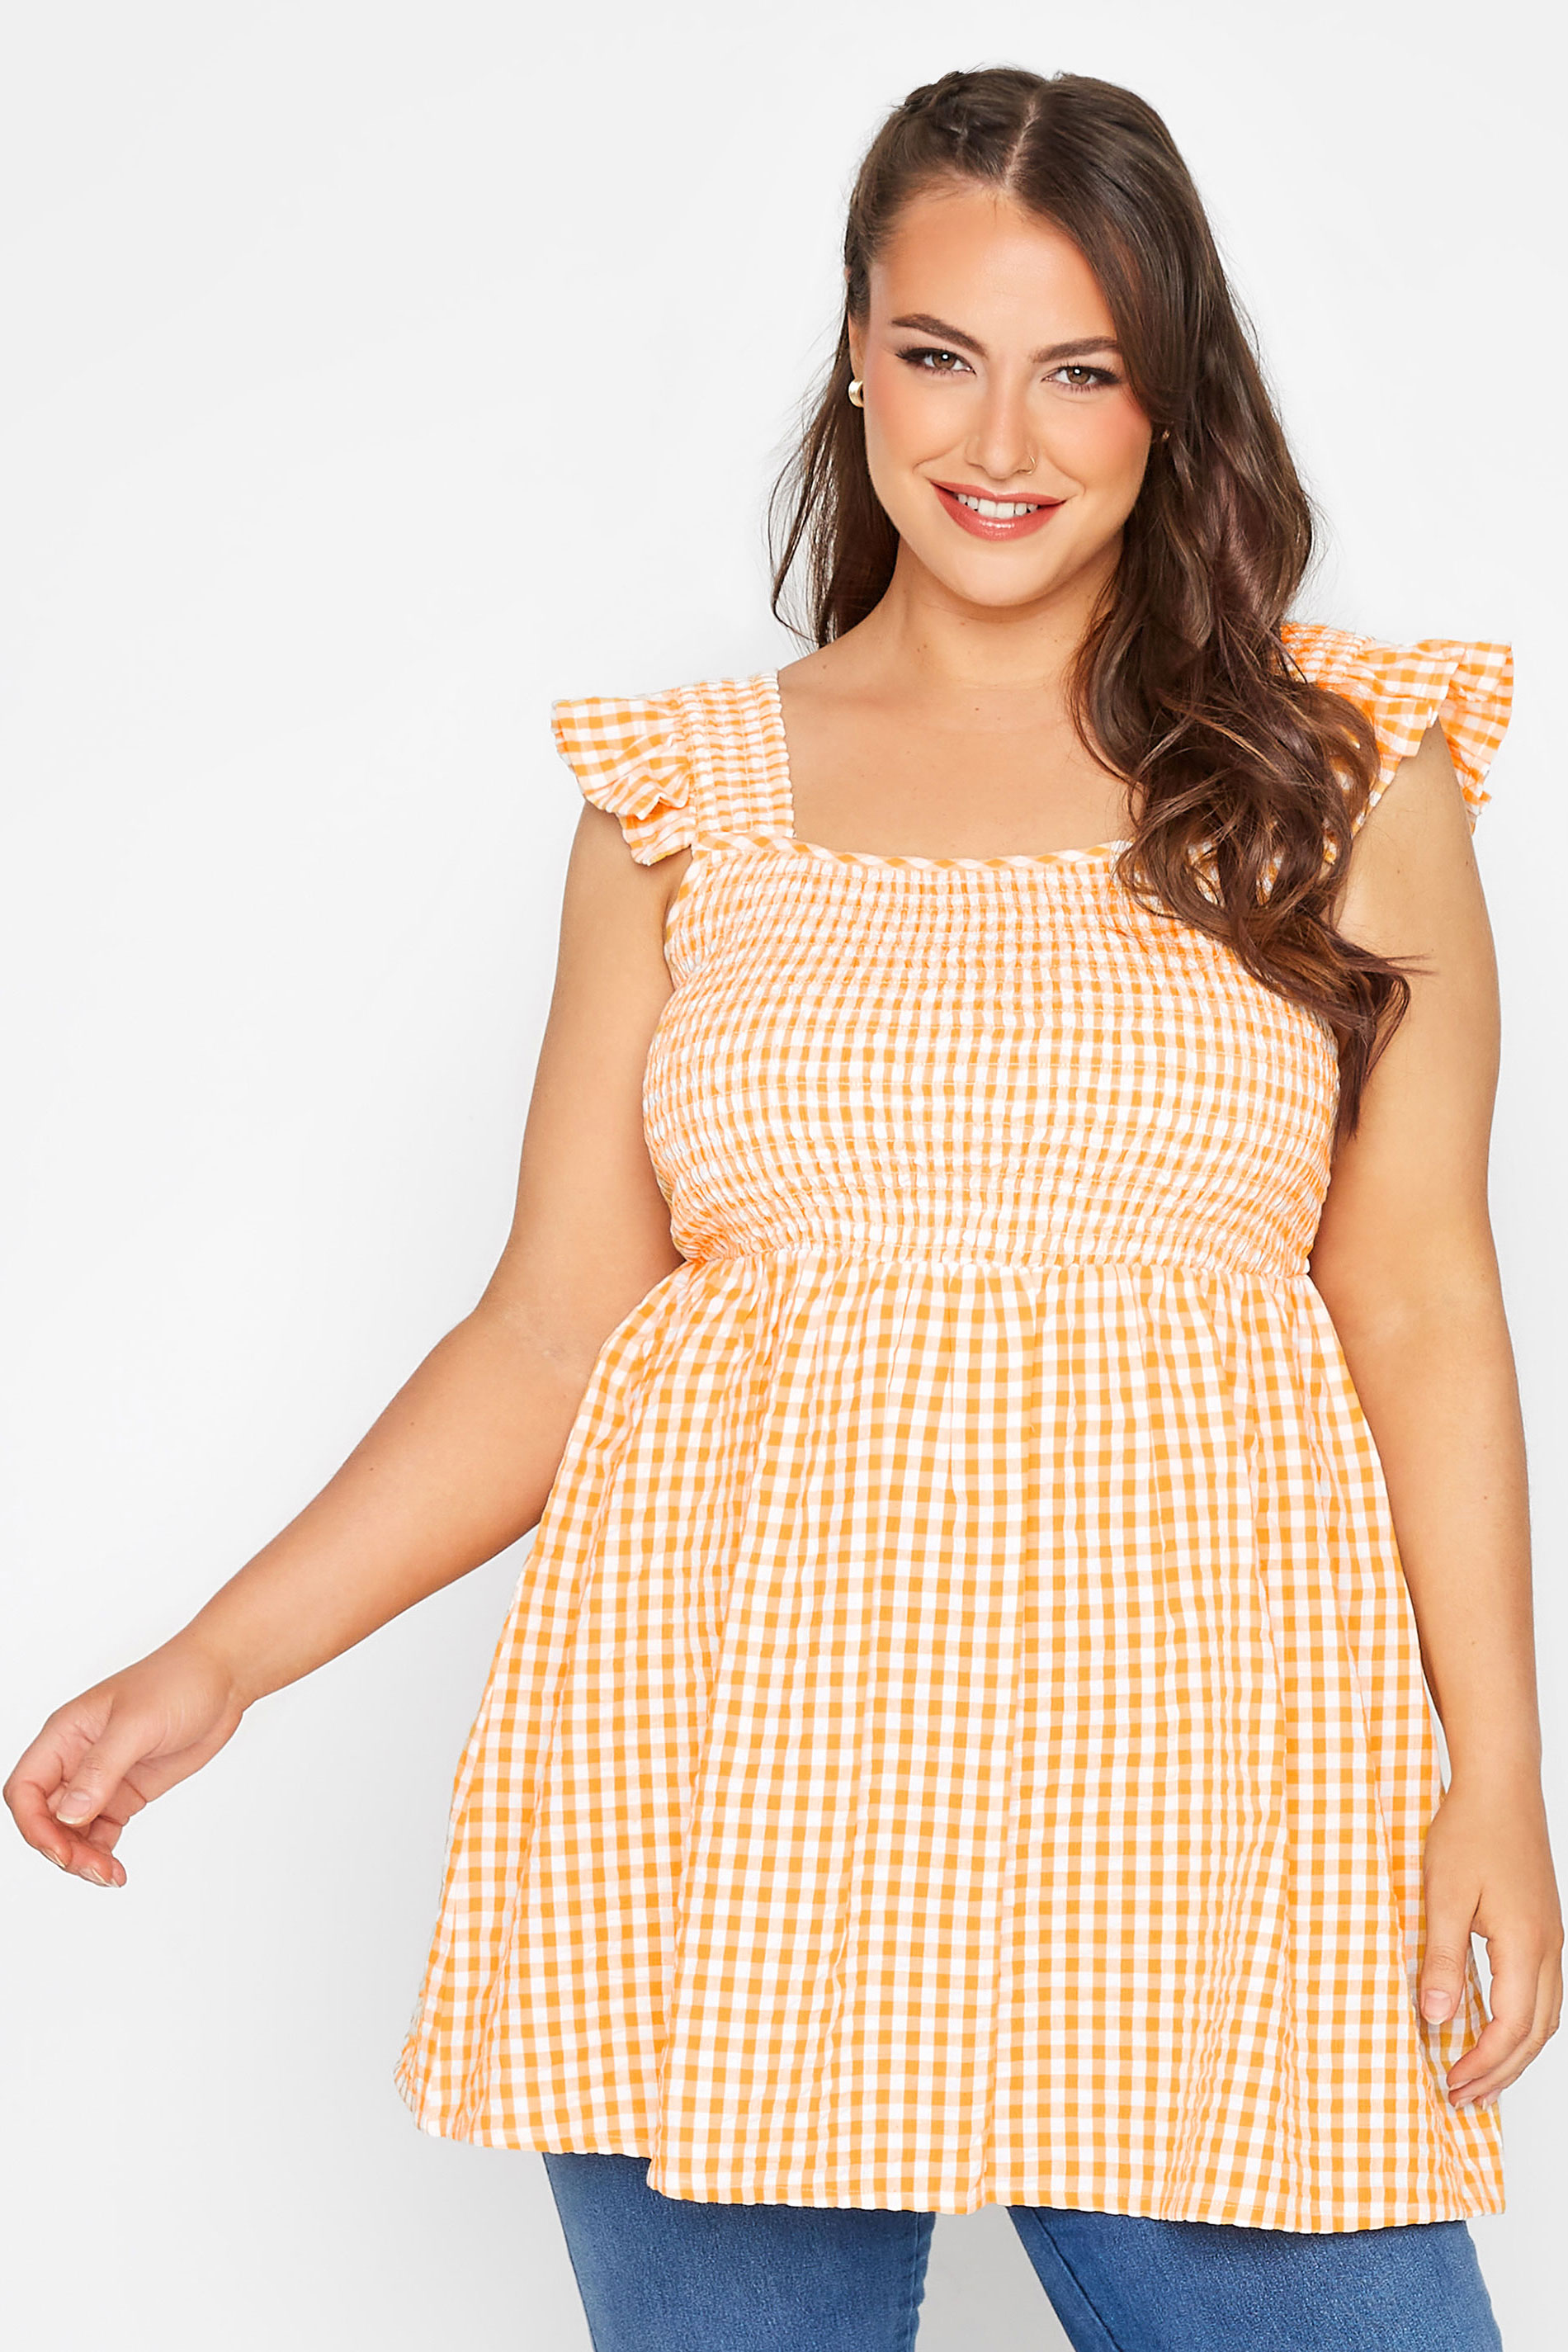 Grande taille  Tops Grande taille  Tops dÉté | LIMITED COLLECTION Curve Yellow Gingham Frill Top - ZR35256